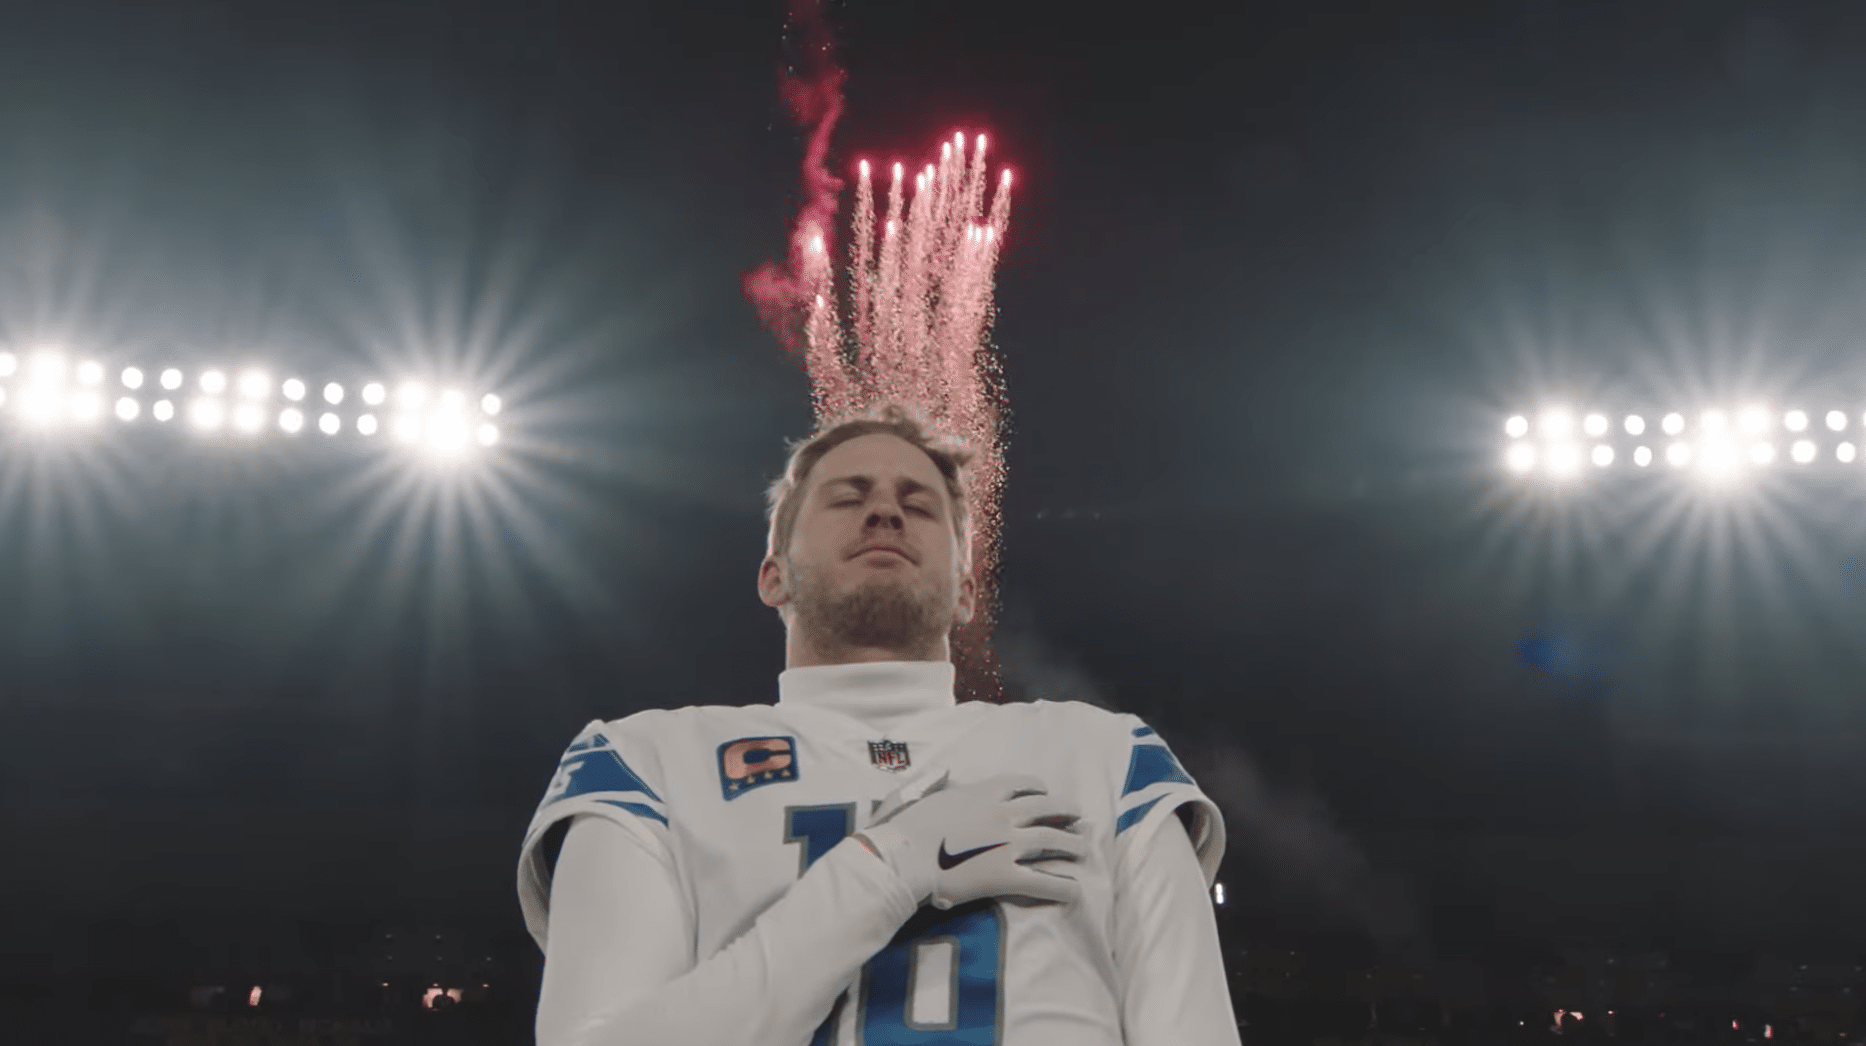 2023 Detroit Lions Depth chart Super Bowl Jared Goff 2023 NFL Draft Peter King Perfect Season NFL MVP Detroit Lions Training Camp Roster Preview Aaron Rodgers Jared Goff Top 10 QB Trait Categories